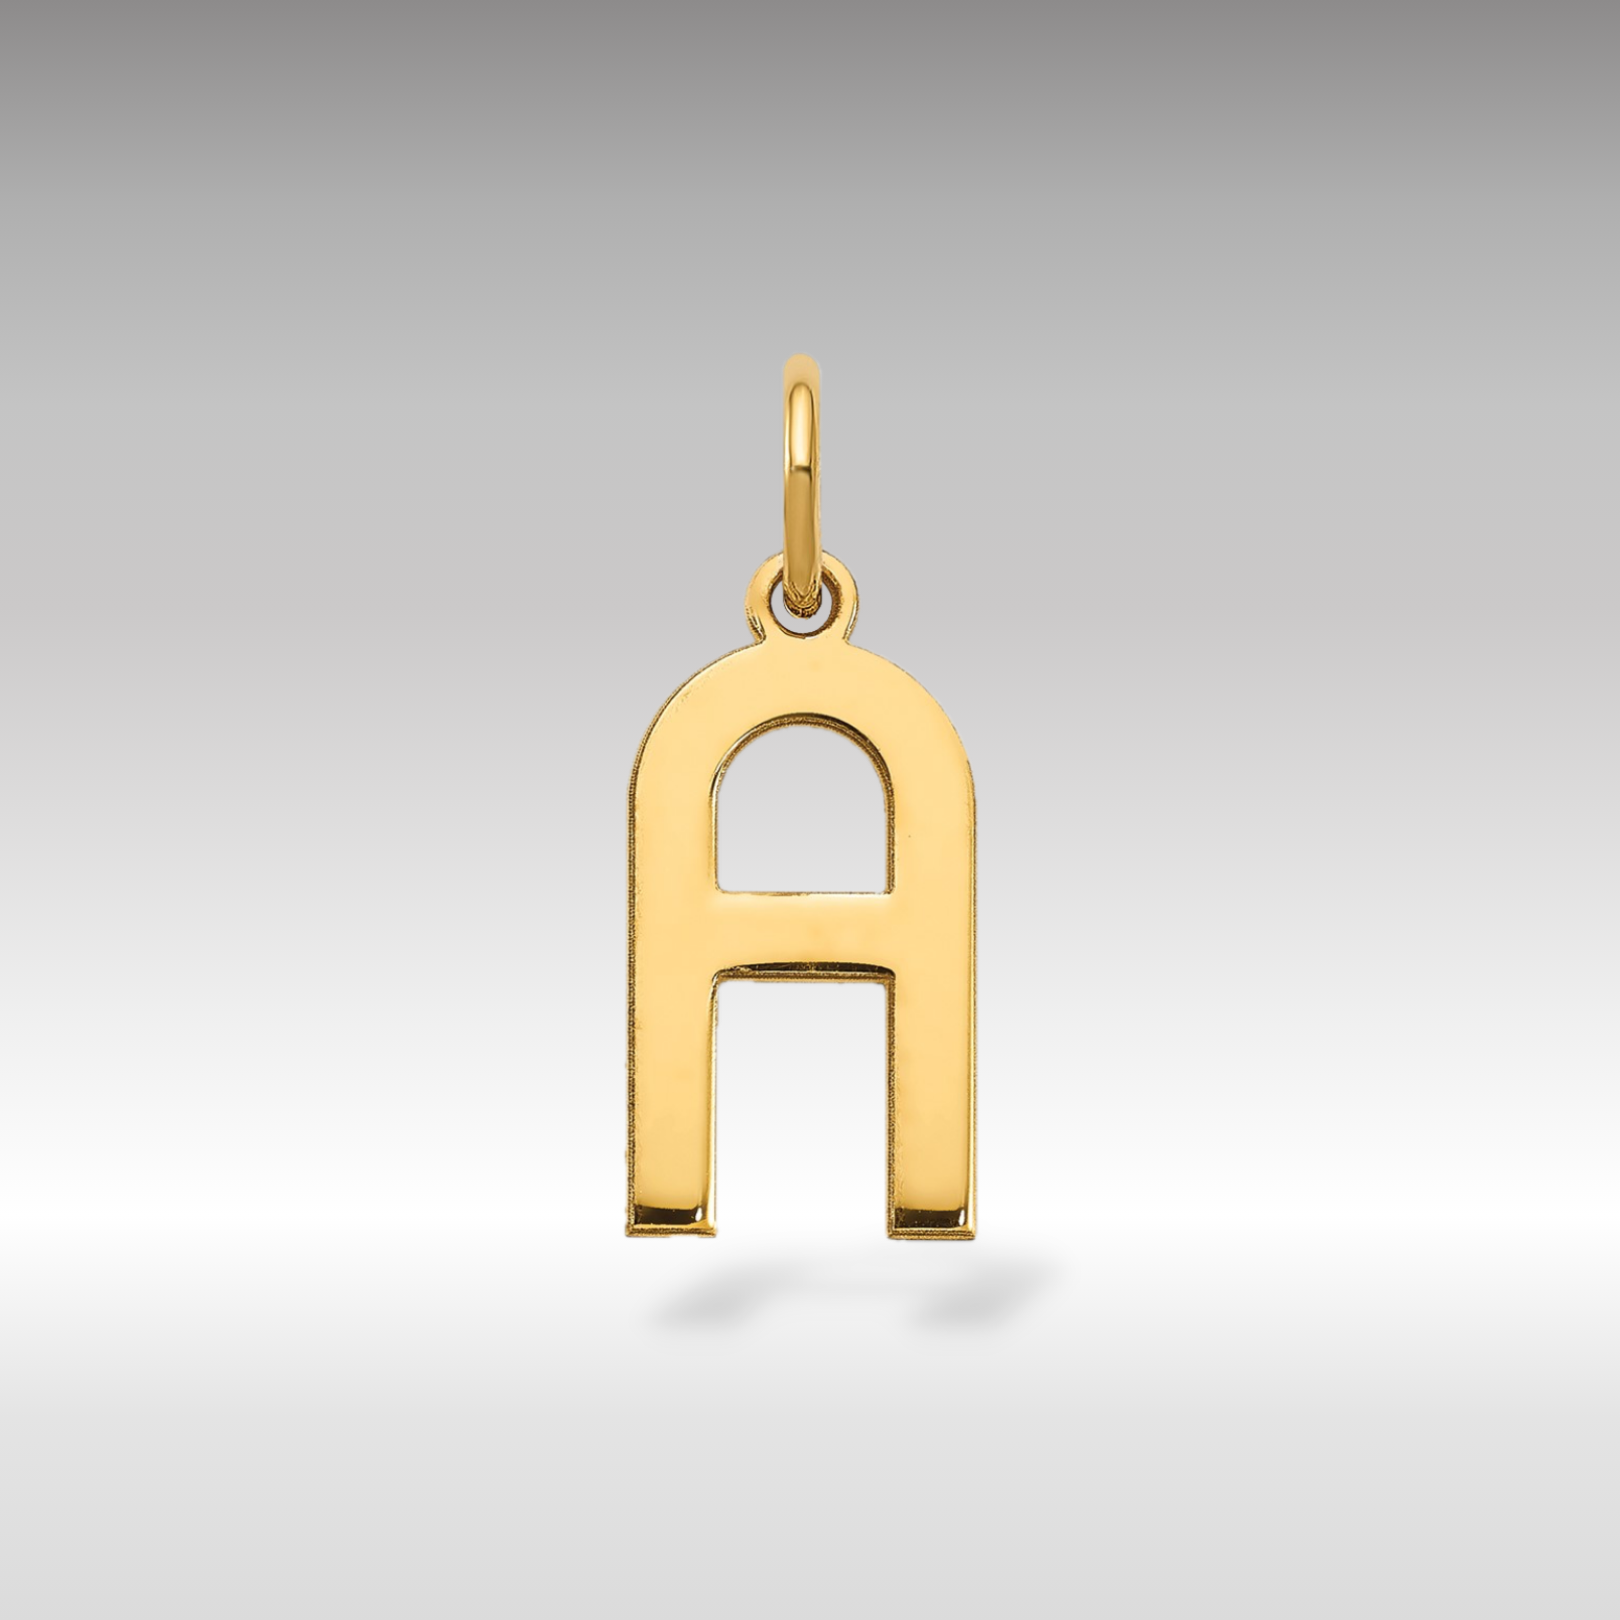 14K Gold Letter "A" Initial Pendant - Charlie & Co. Jewelry